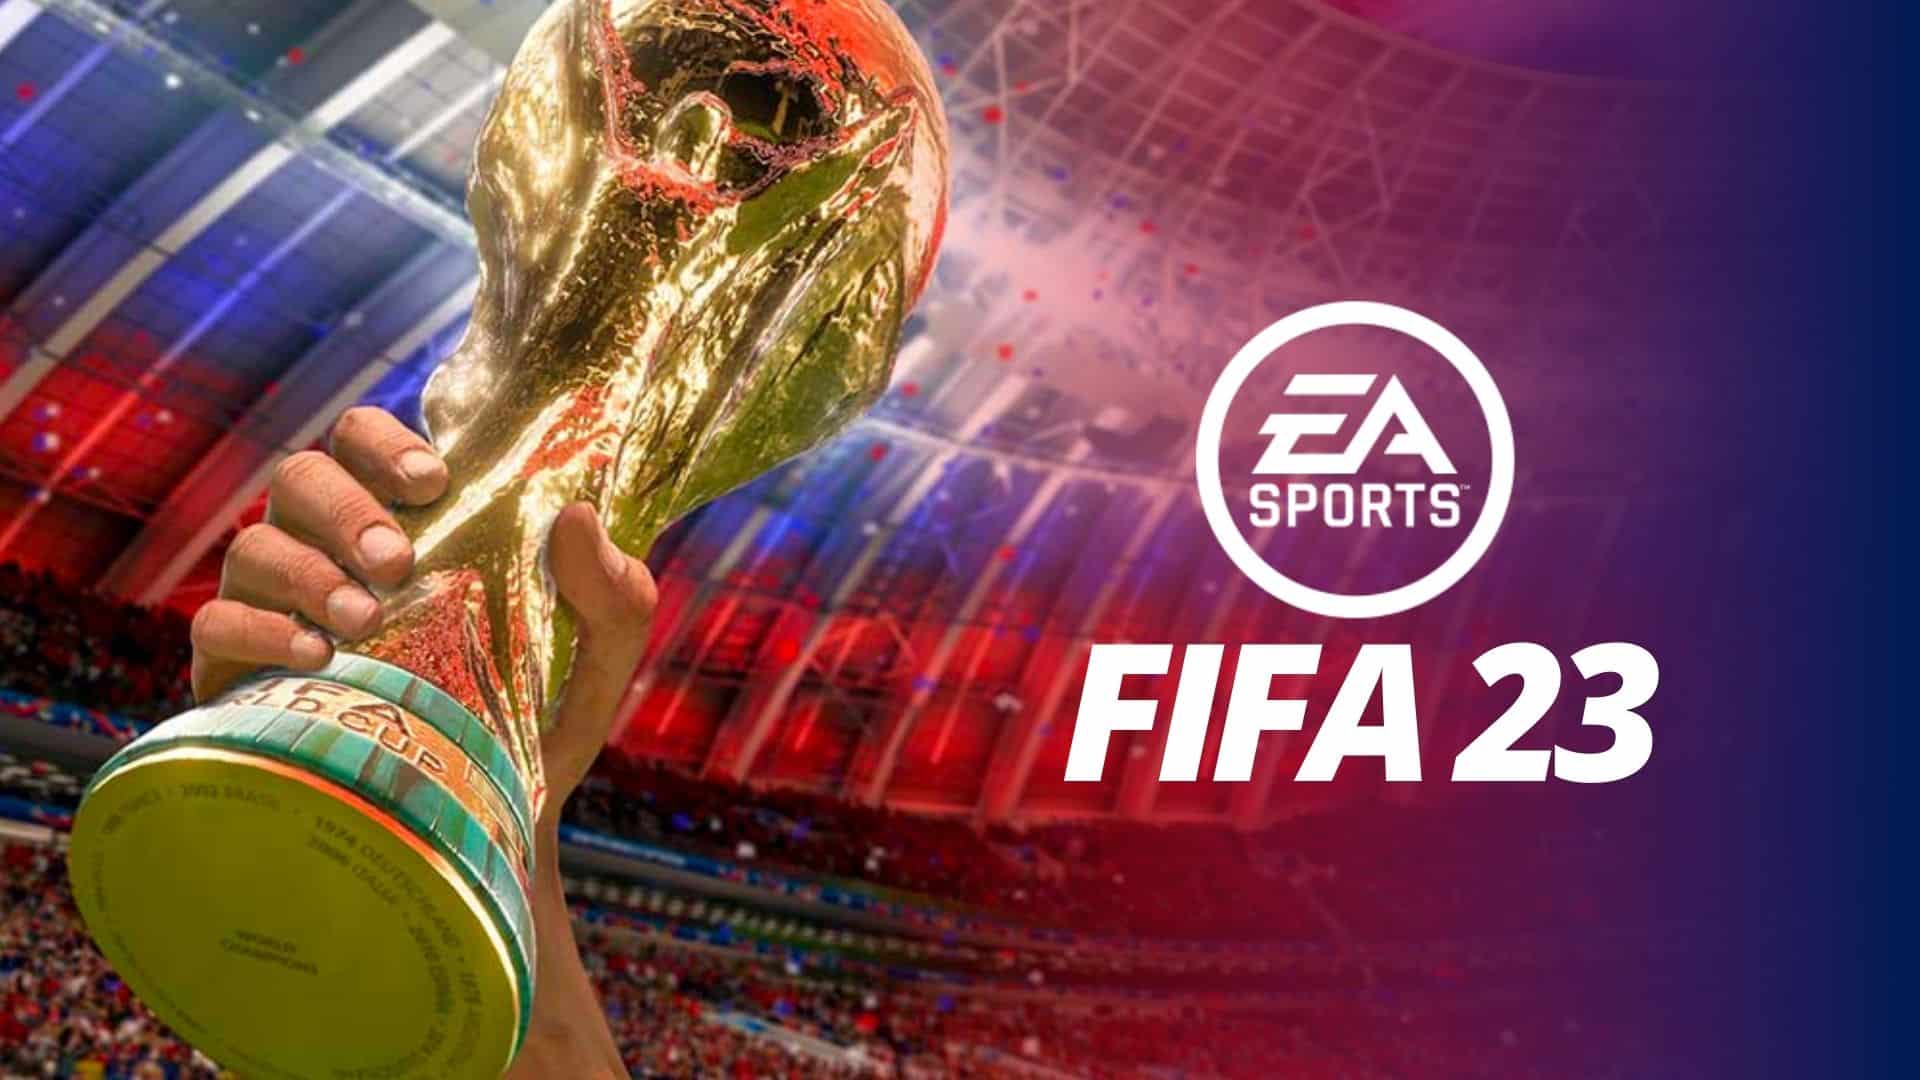 fifa 23 with world cup